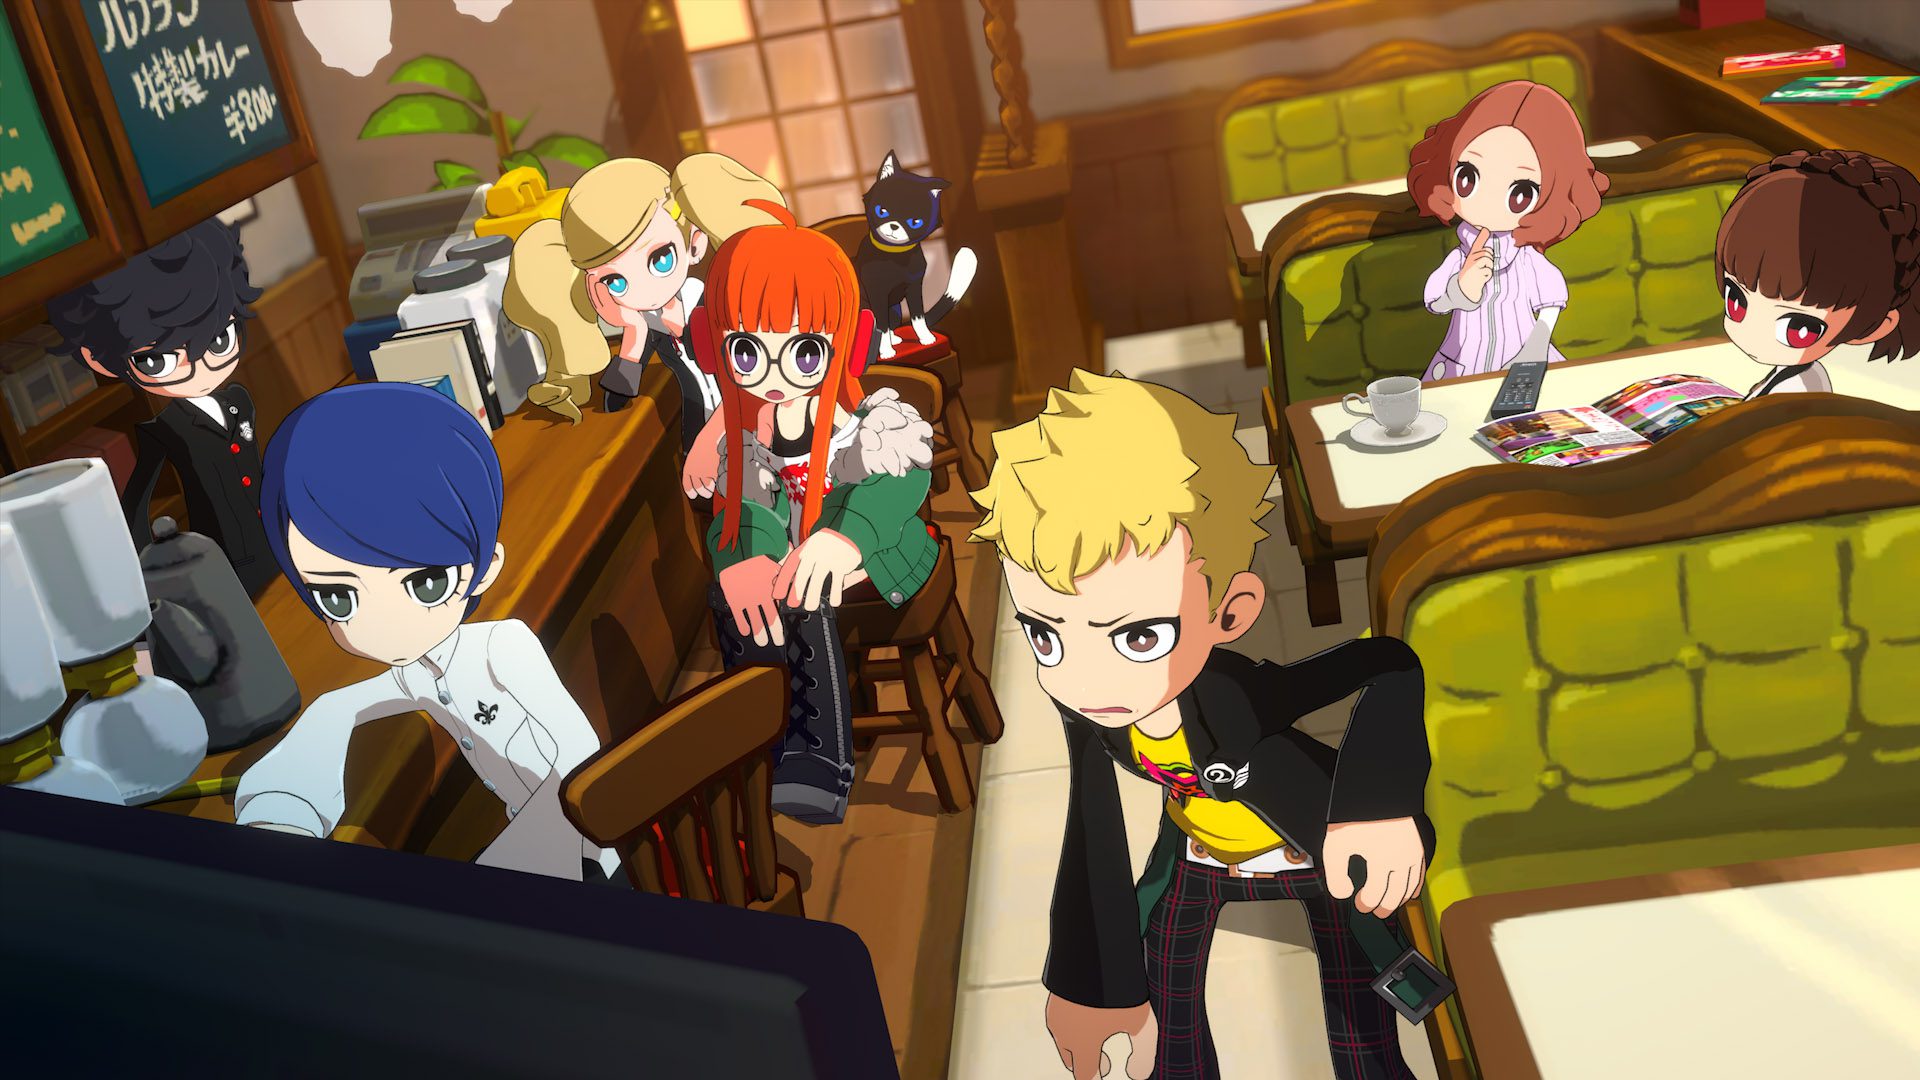 Faz on X: Persona 5 Tactica Steam page is up  / X